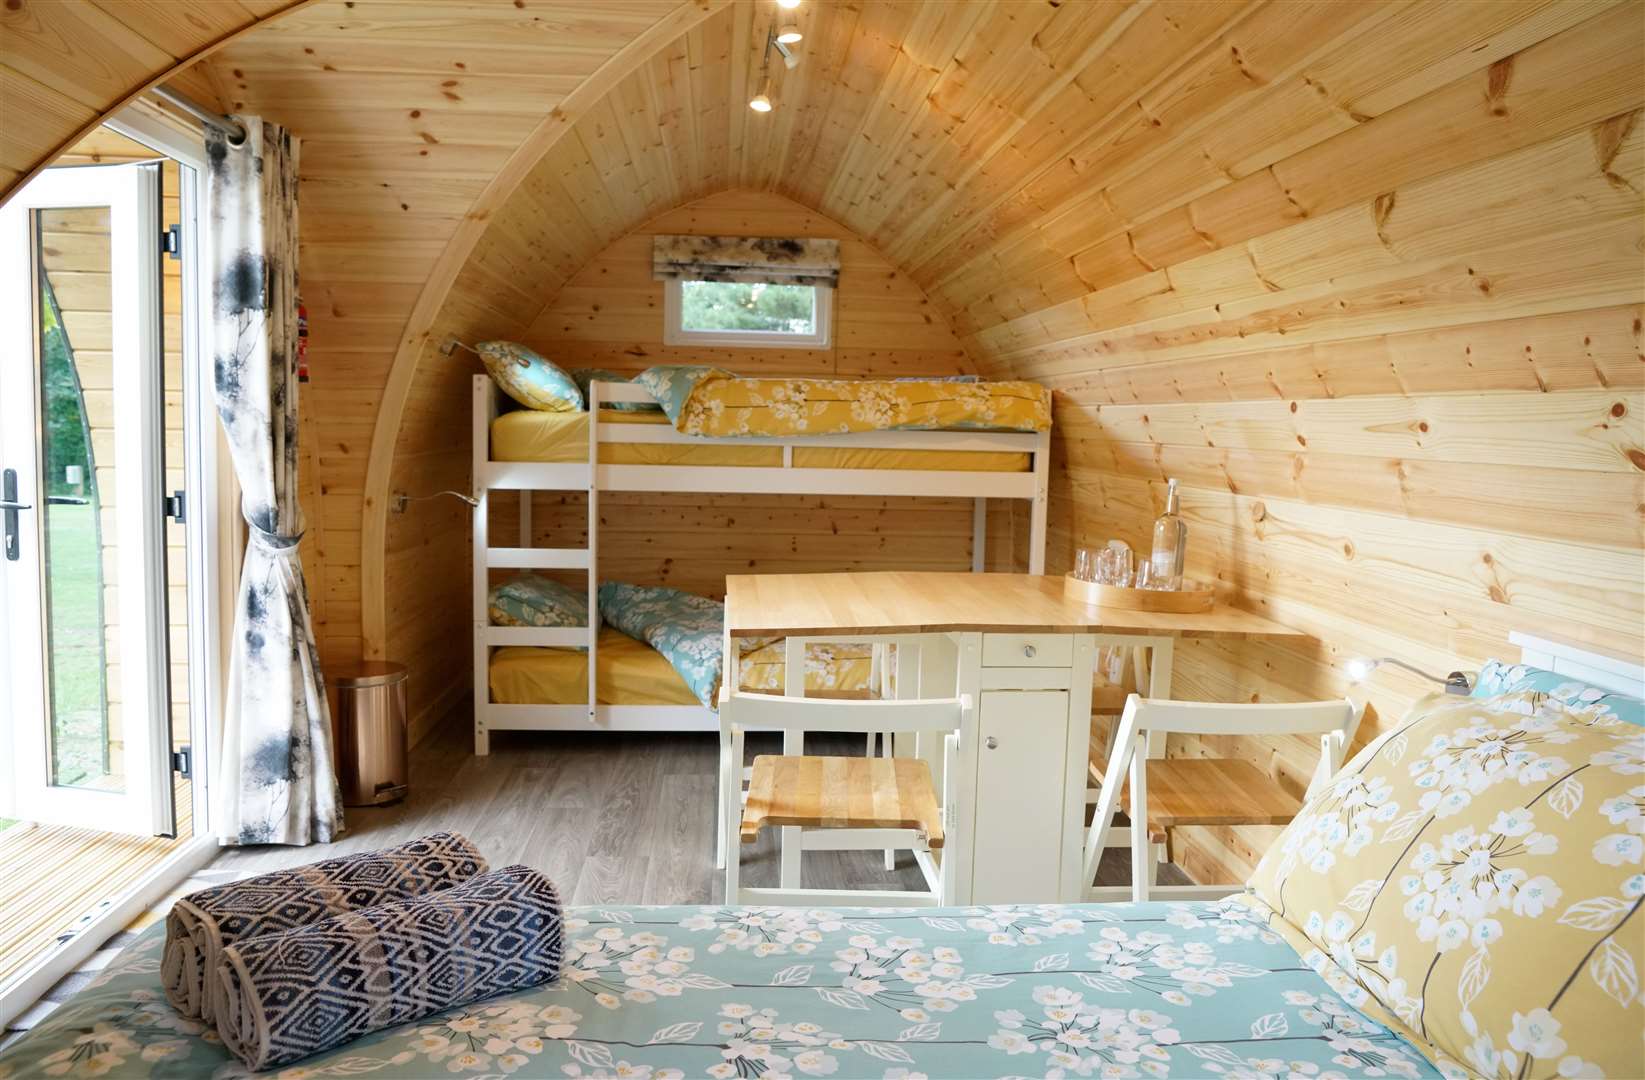 Inside one of the new glamping pods. Picture: Tina Green